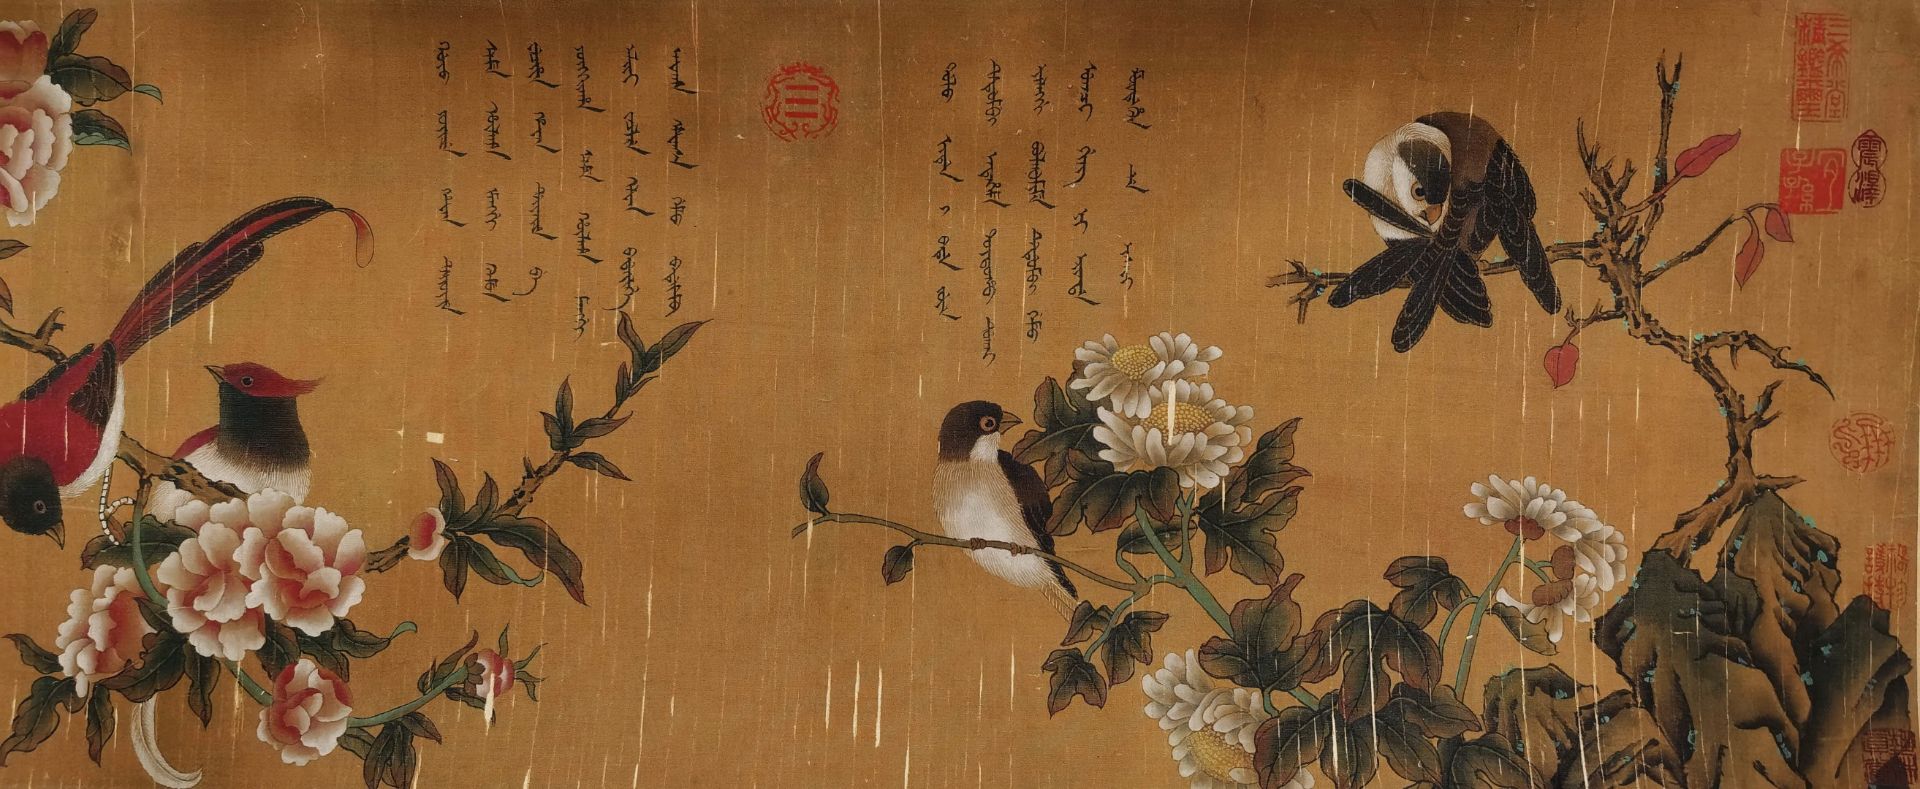 A Chinese Hand Scroll Painting By Jiang Tingxi - Image 2 of 13